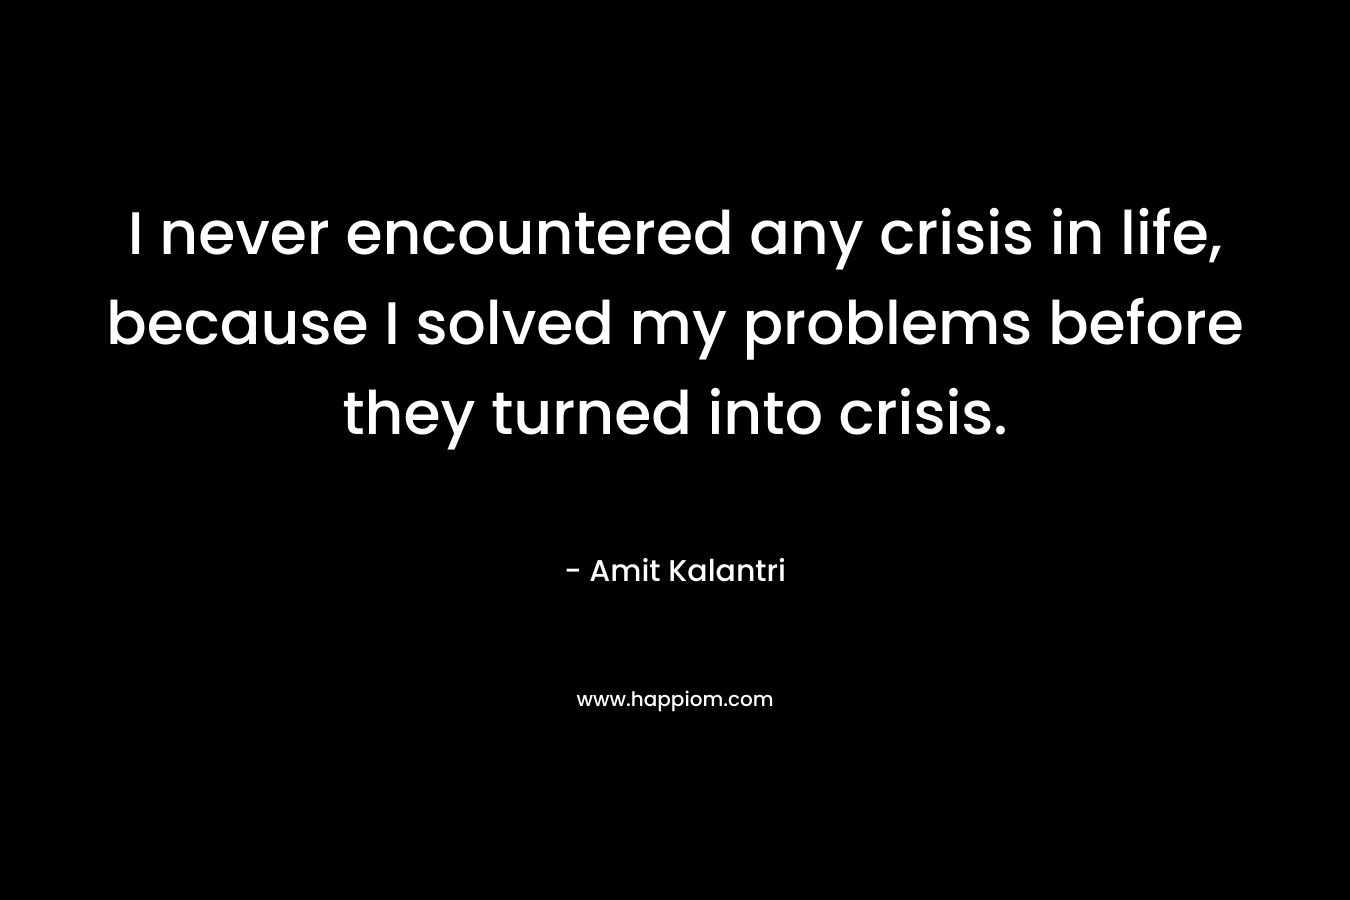 I never encountered any crisis in life, because I solved my problems before they turned into crisis. – Amit Kalantri